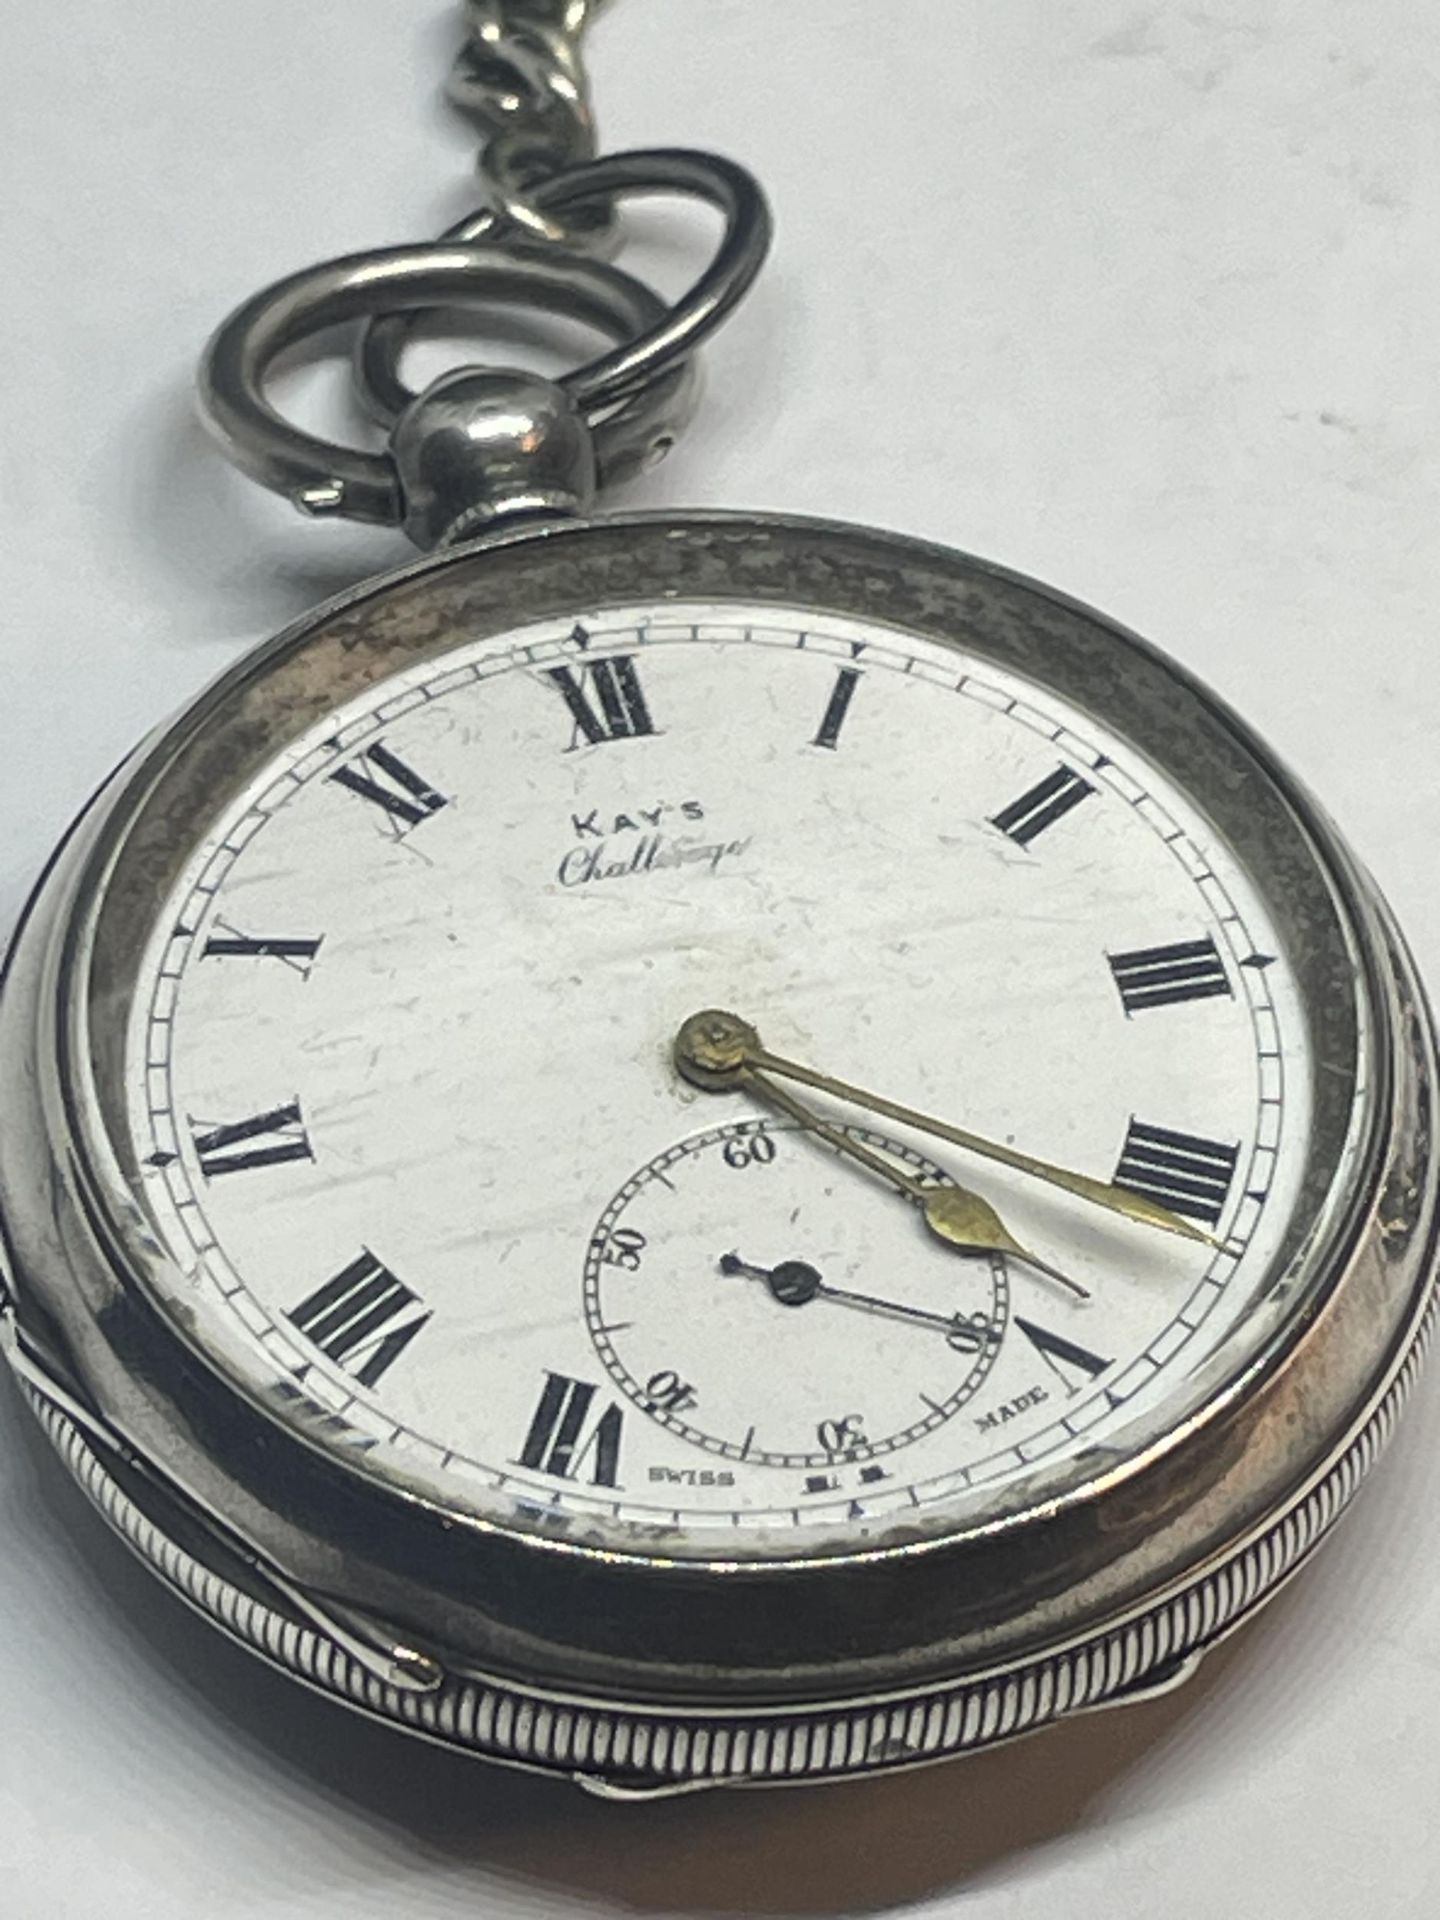 A MARKED 925 SILVER SWISS KAYS CHALLENGE POCKET WATCH WITH T BAR CHAIN VENDOR STATES WORKING BUT - Image 2 of 5